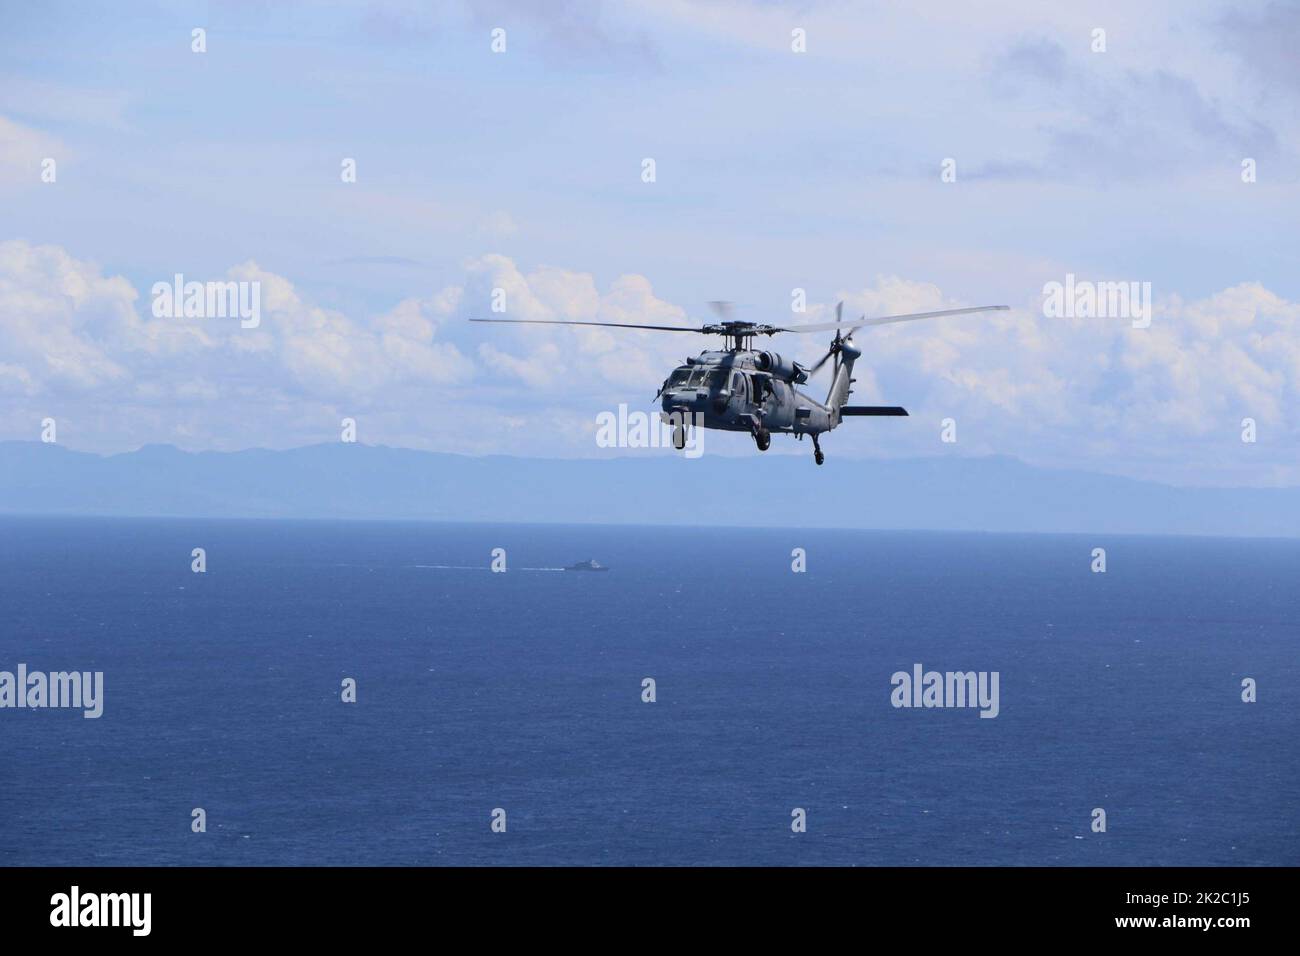 220910-N-N3764-3001  CARIBBEAN SEA - (Sept. 10, 2022) -- An MH-60S Sea Hawk helicopter assigned to Helicopter Sea Combat Squadron (HSC) 28, Detachment 8, participates in a photo exercise overlooking the Freedom-variant littoral combat ship USS Billings (LCS 15) in the Caribbean Sea, Sept. 10, 2022. Billings is deployed to the U.S. 4th Fleet area of operations to support Joint Interagency Task Force South’s mission, which includes counter-illicit drug trafficking missions in the Caribbean and Eastern Pacific. (U.S. Navy courtesy photo/Released) Stock Photo